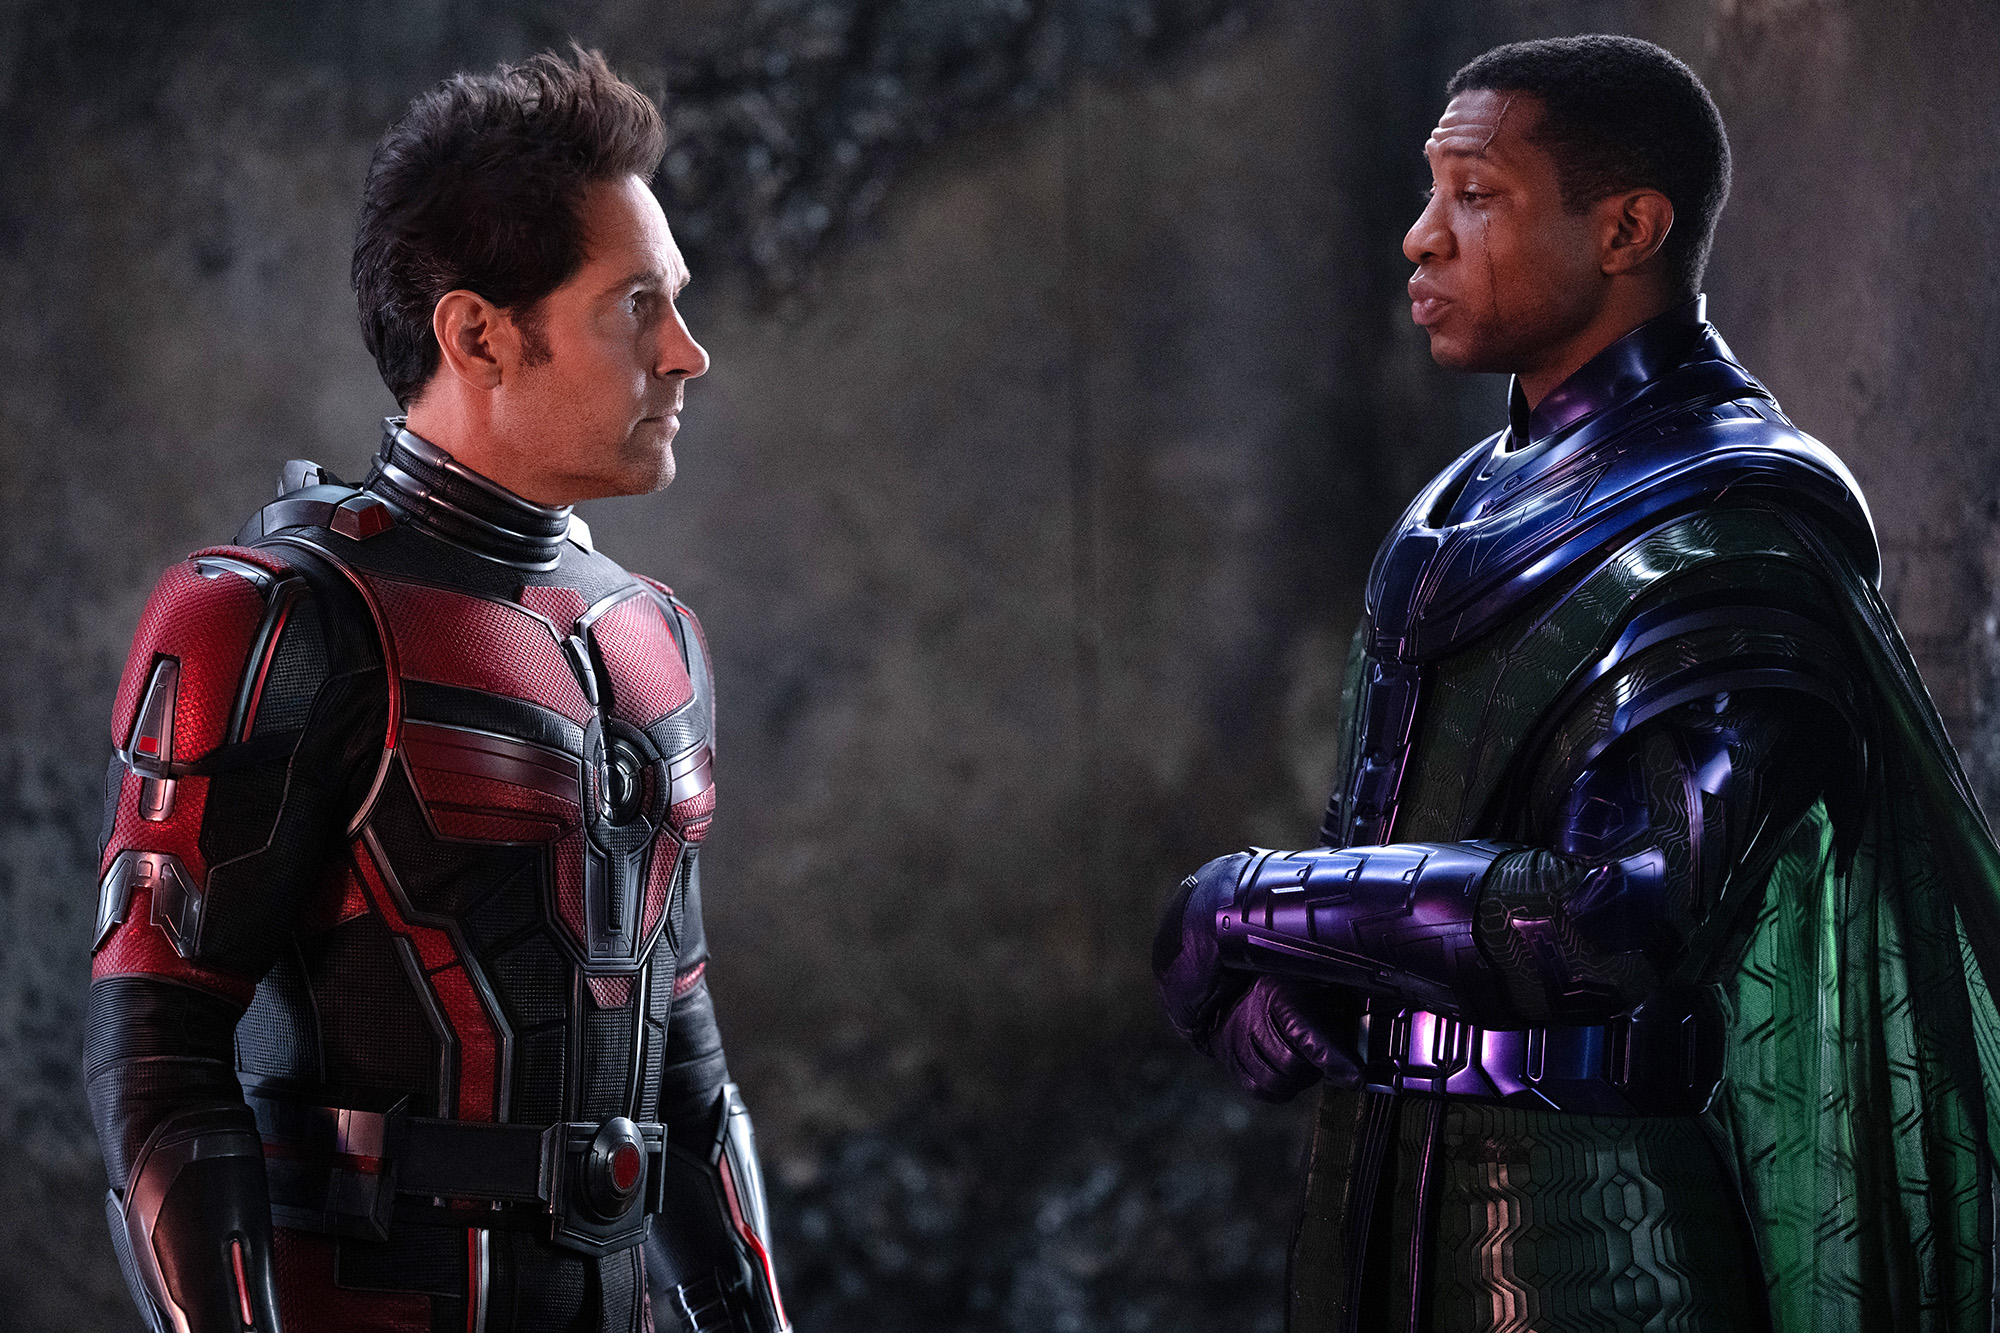 ANT-MAN AND THE WASP: QUANTUMANIA | Paul Rudd as Scott Lang/Ant-Man and Jonathan Majors as Kang the Conqueror in Marvel Studios